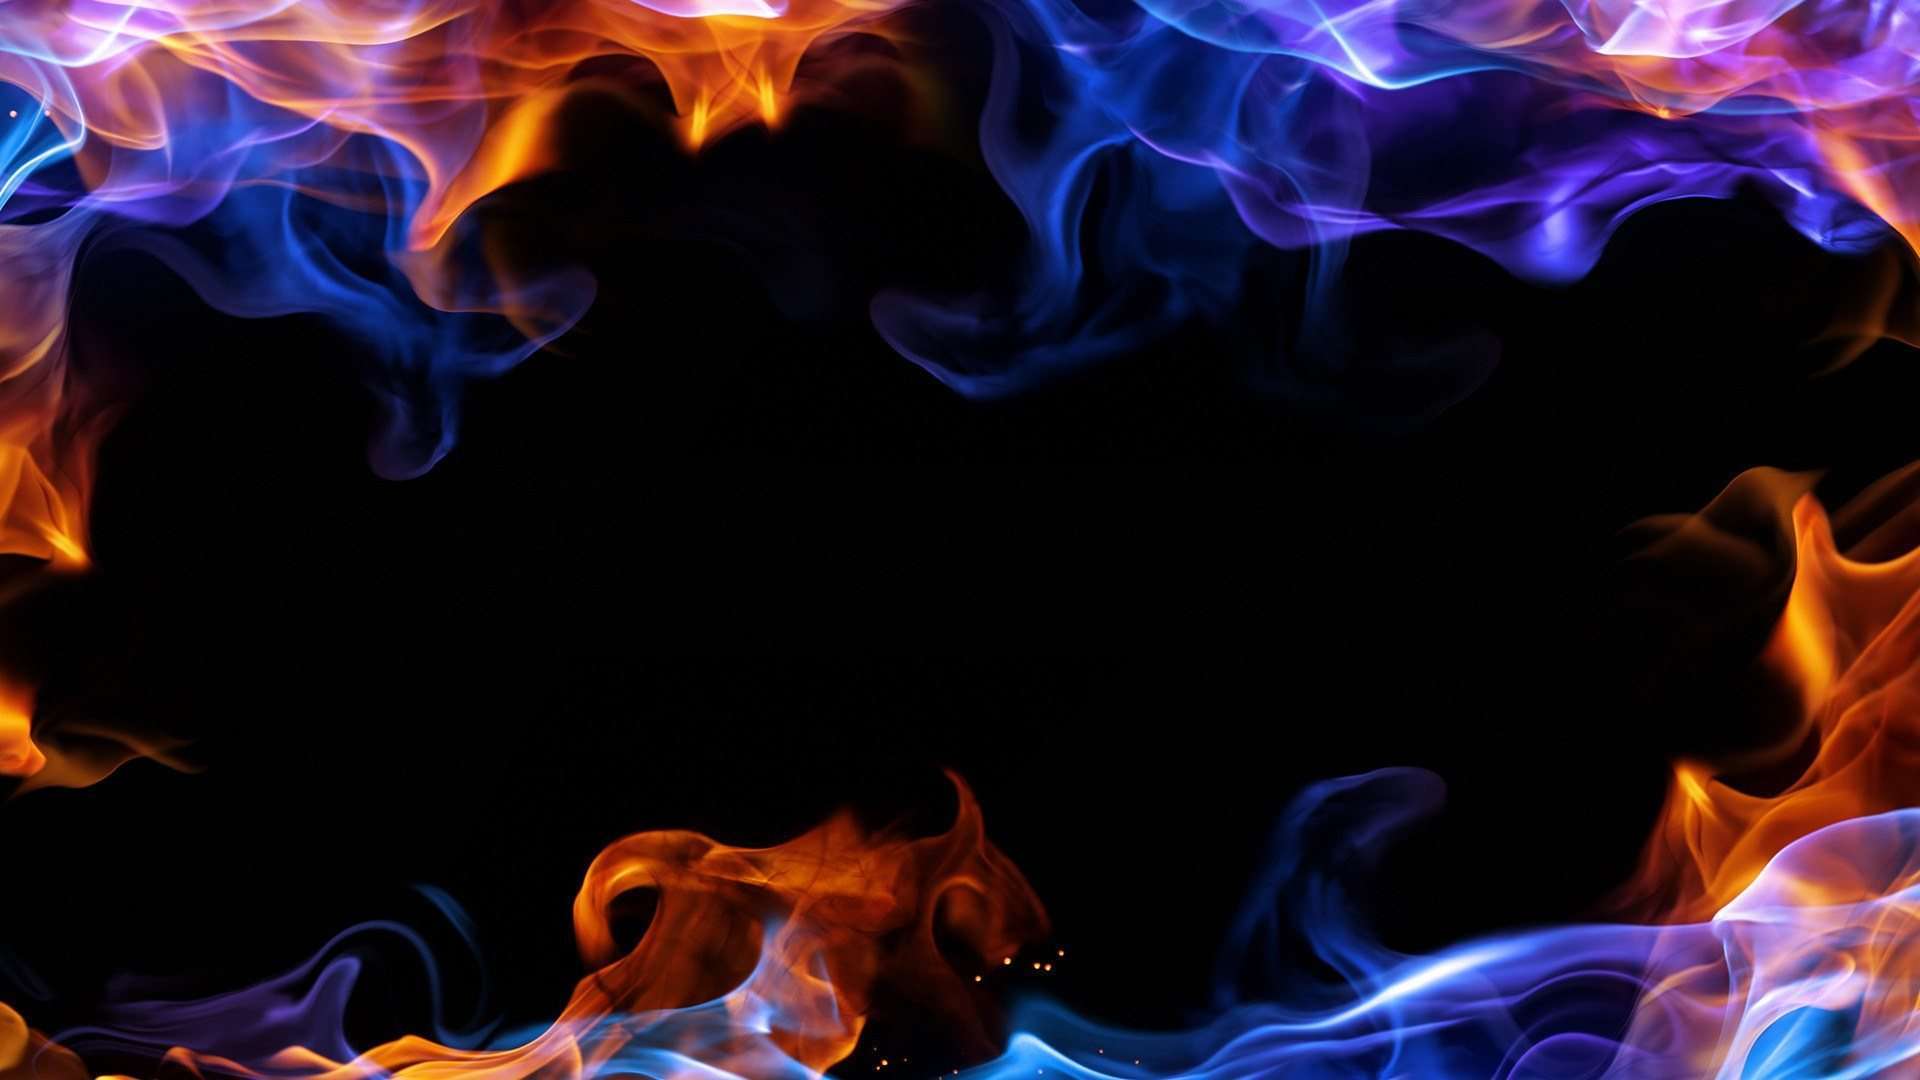 abstract-flame-high-resolution-wallpaper-for-desktop-background-download-flame-images-free-free-download.jpg